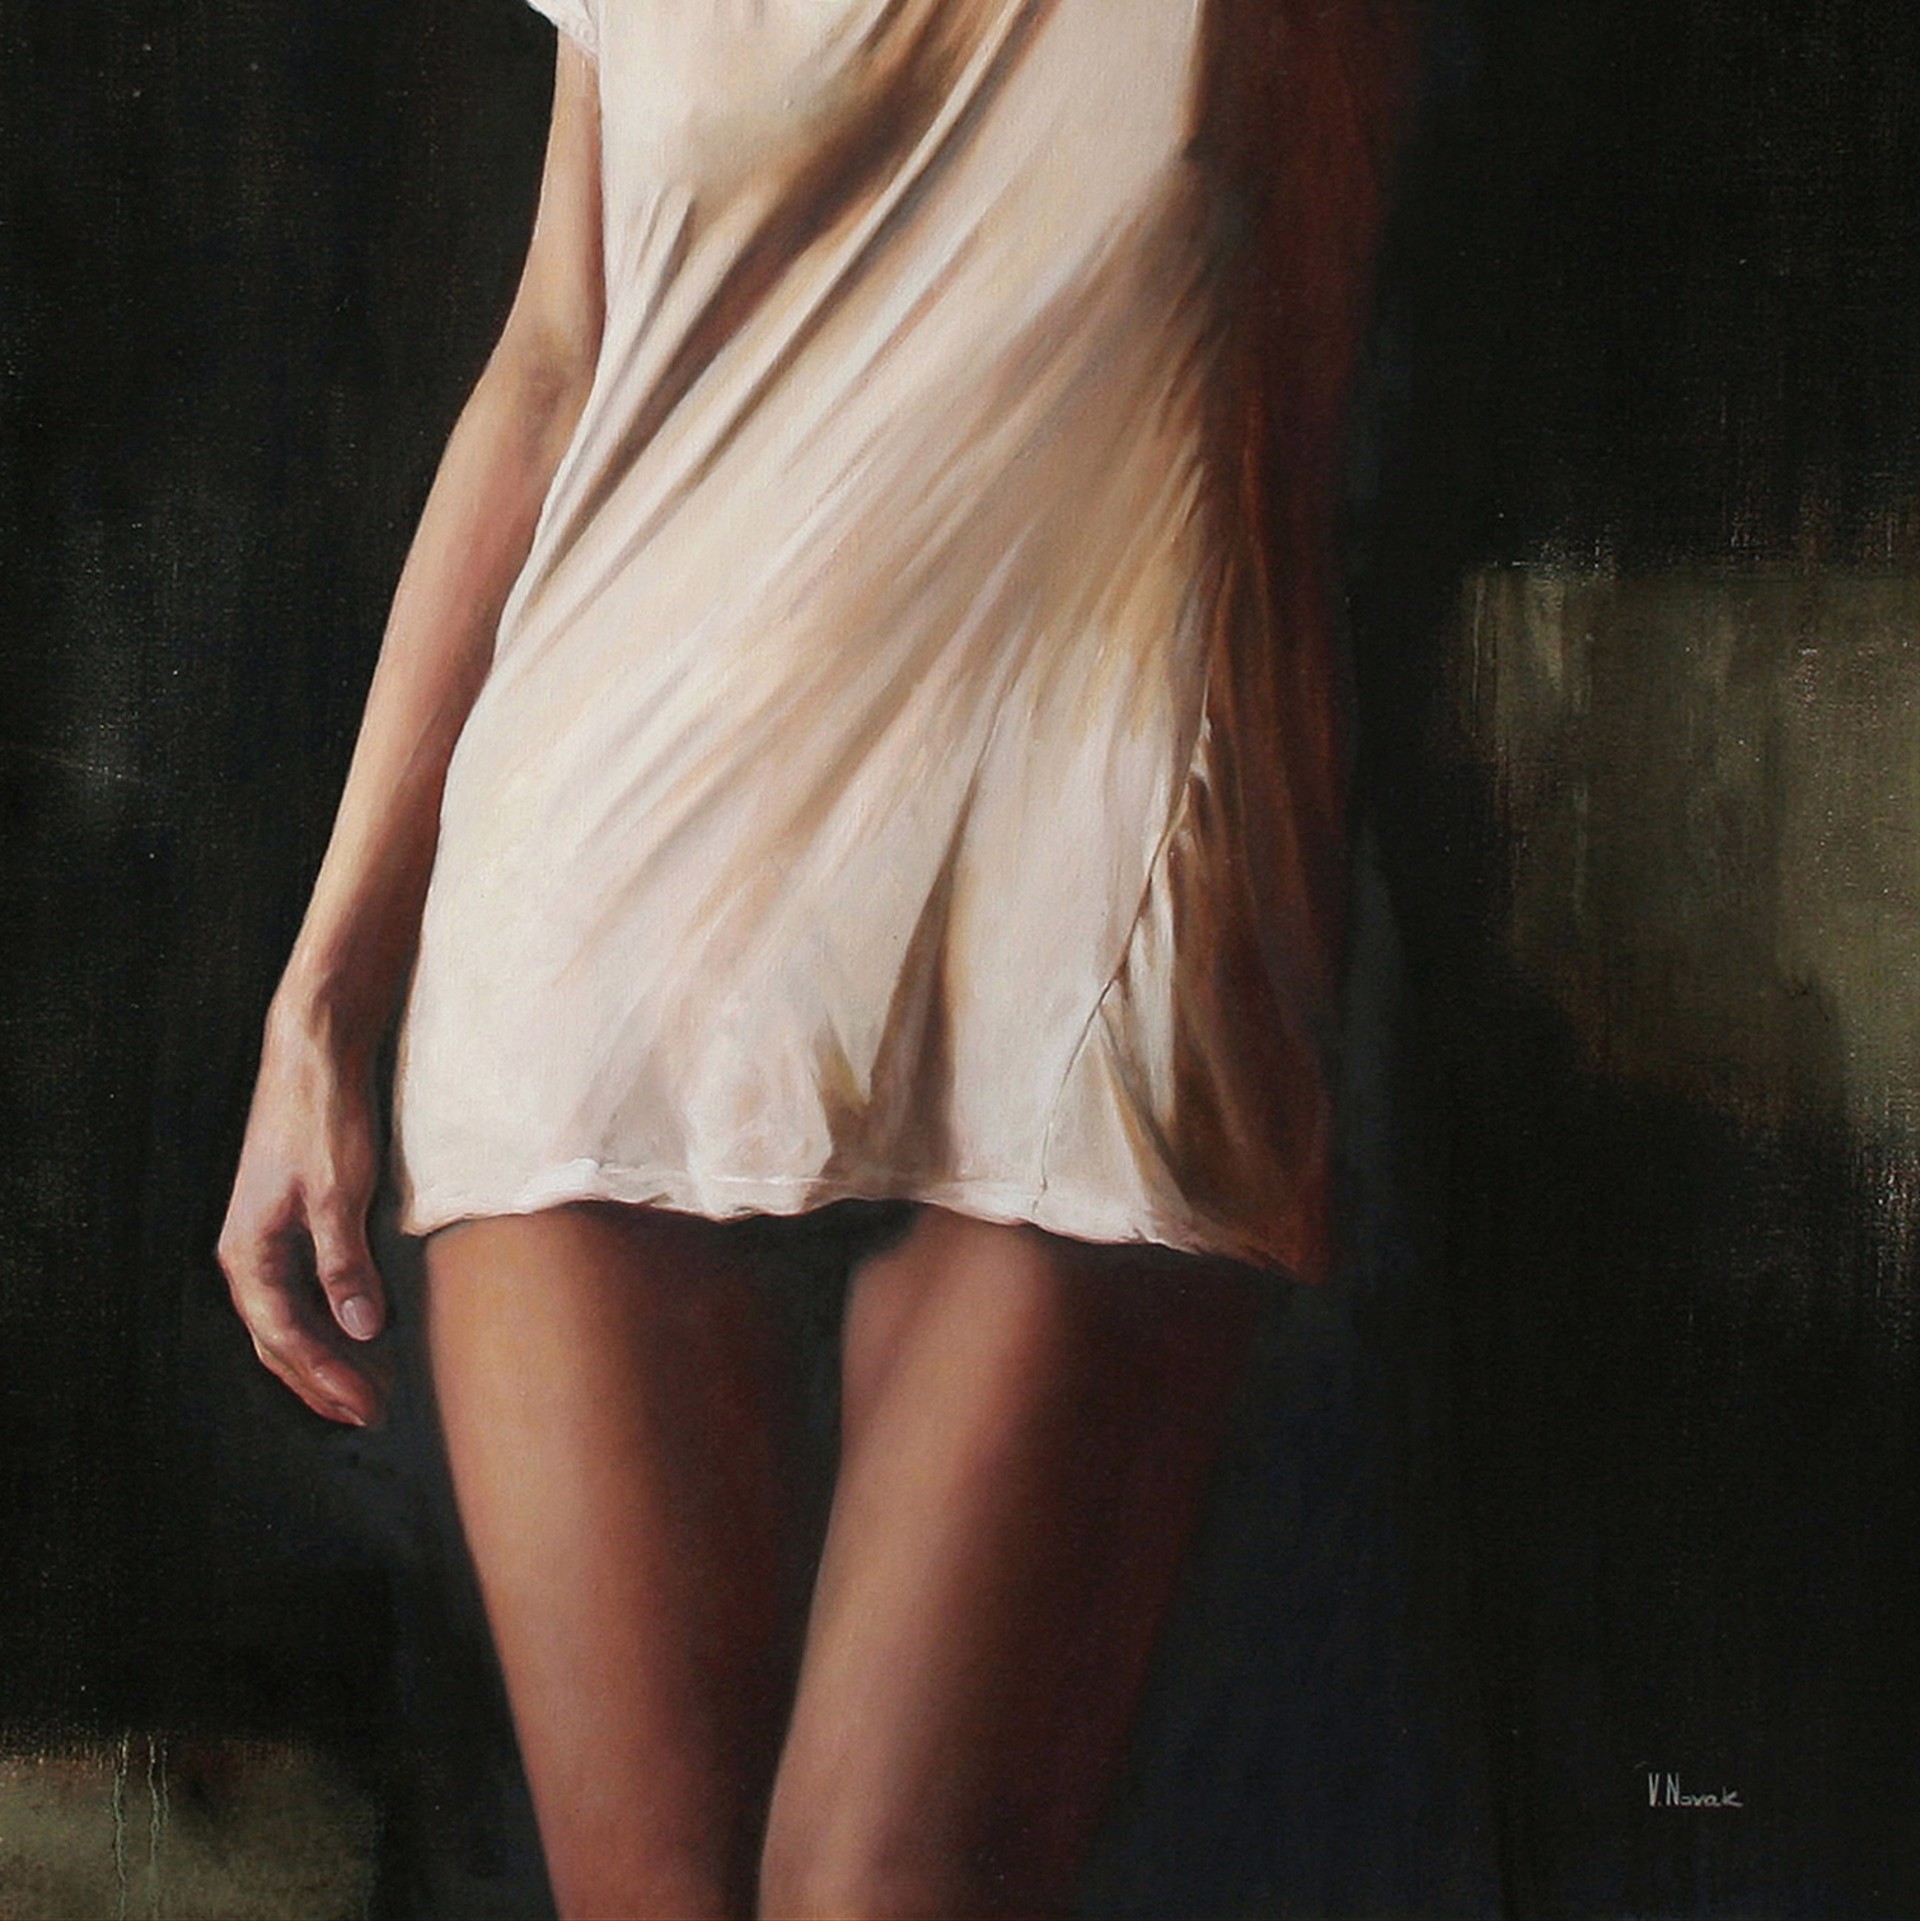 Expressive figurative oil painting "Falling to Pieces" by Victoria Novak, depicting a young woman in a white dress with her arm raised, against a dark, abstract background with dripping paint.